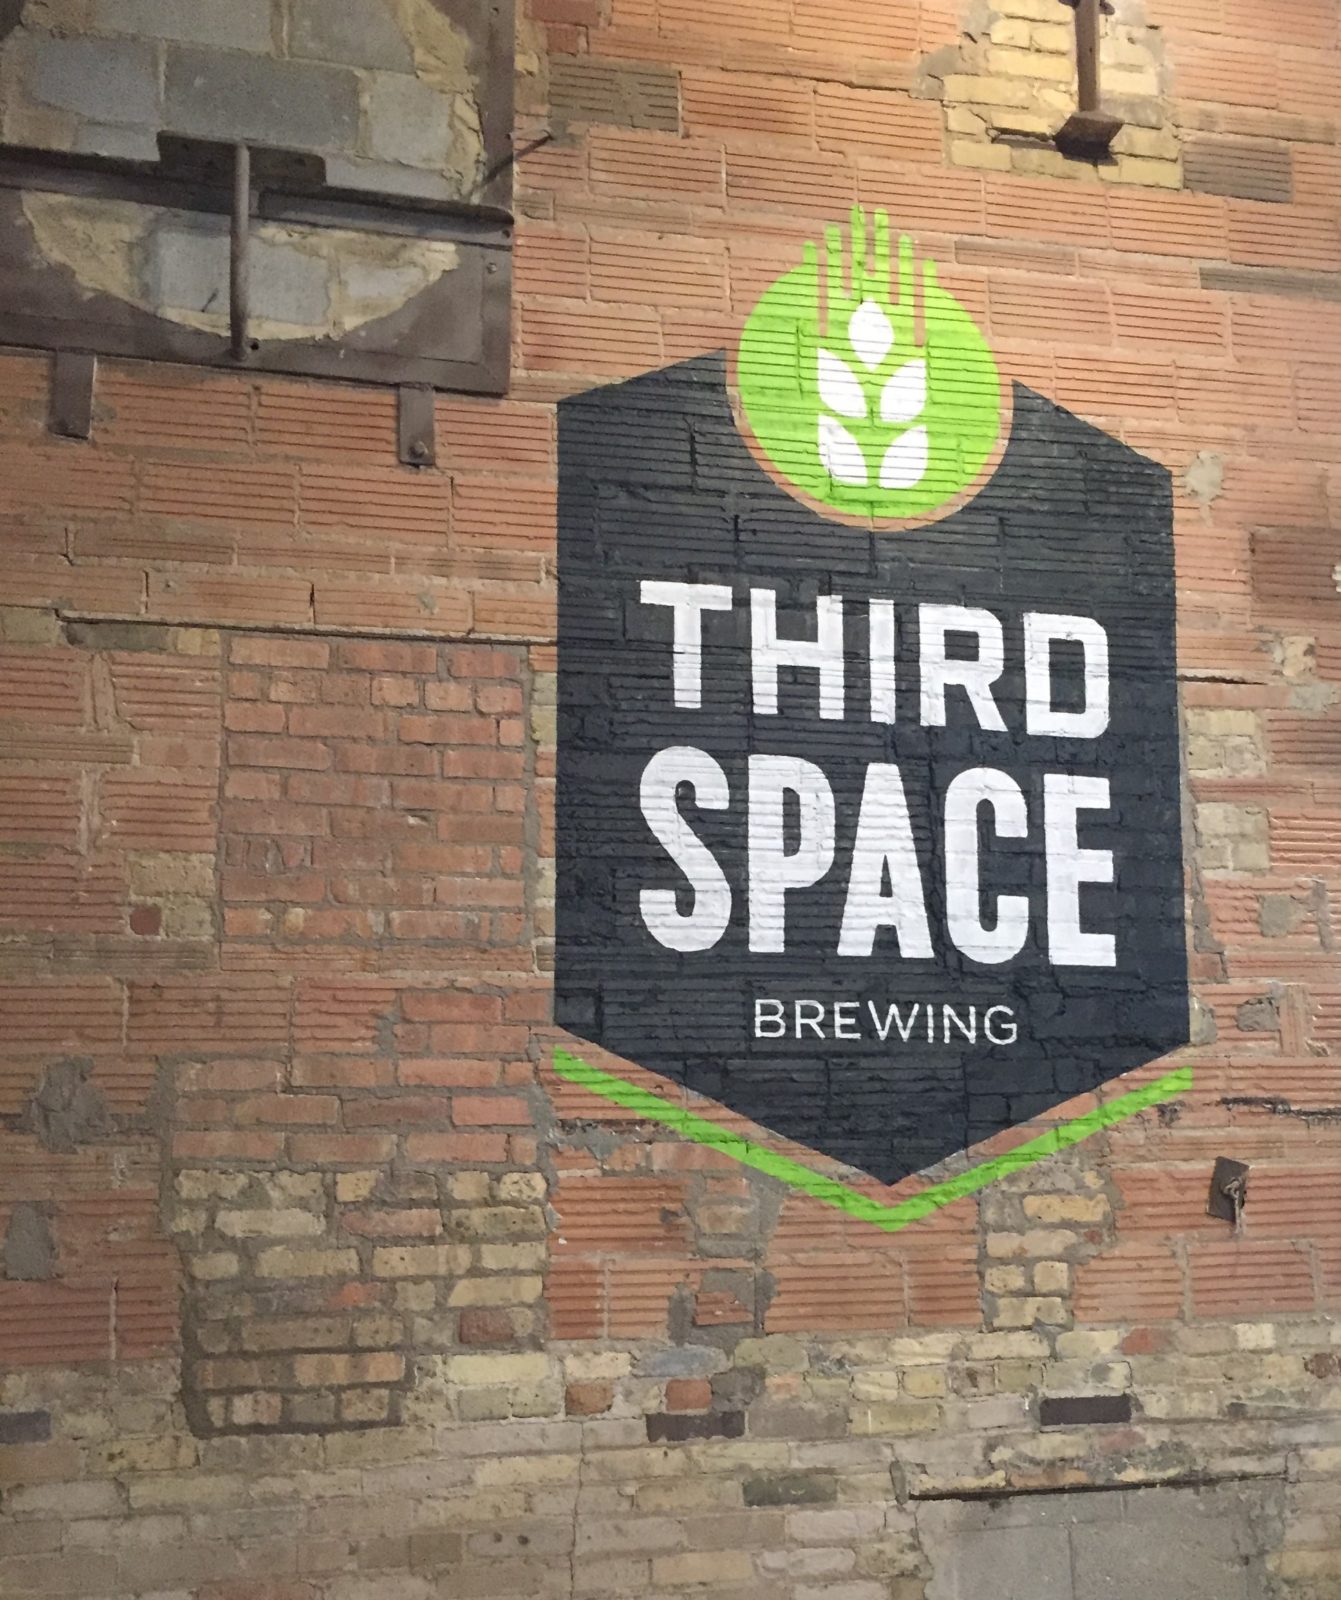 Third Space Brewing Partners with Camp Minikani to Celebrate 6th Anniversary September 24th